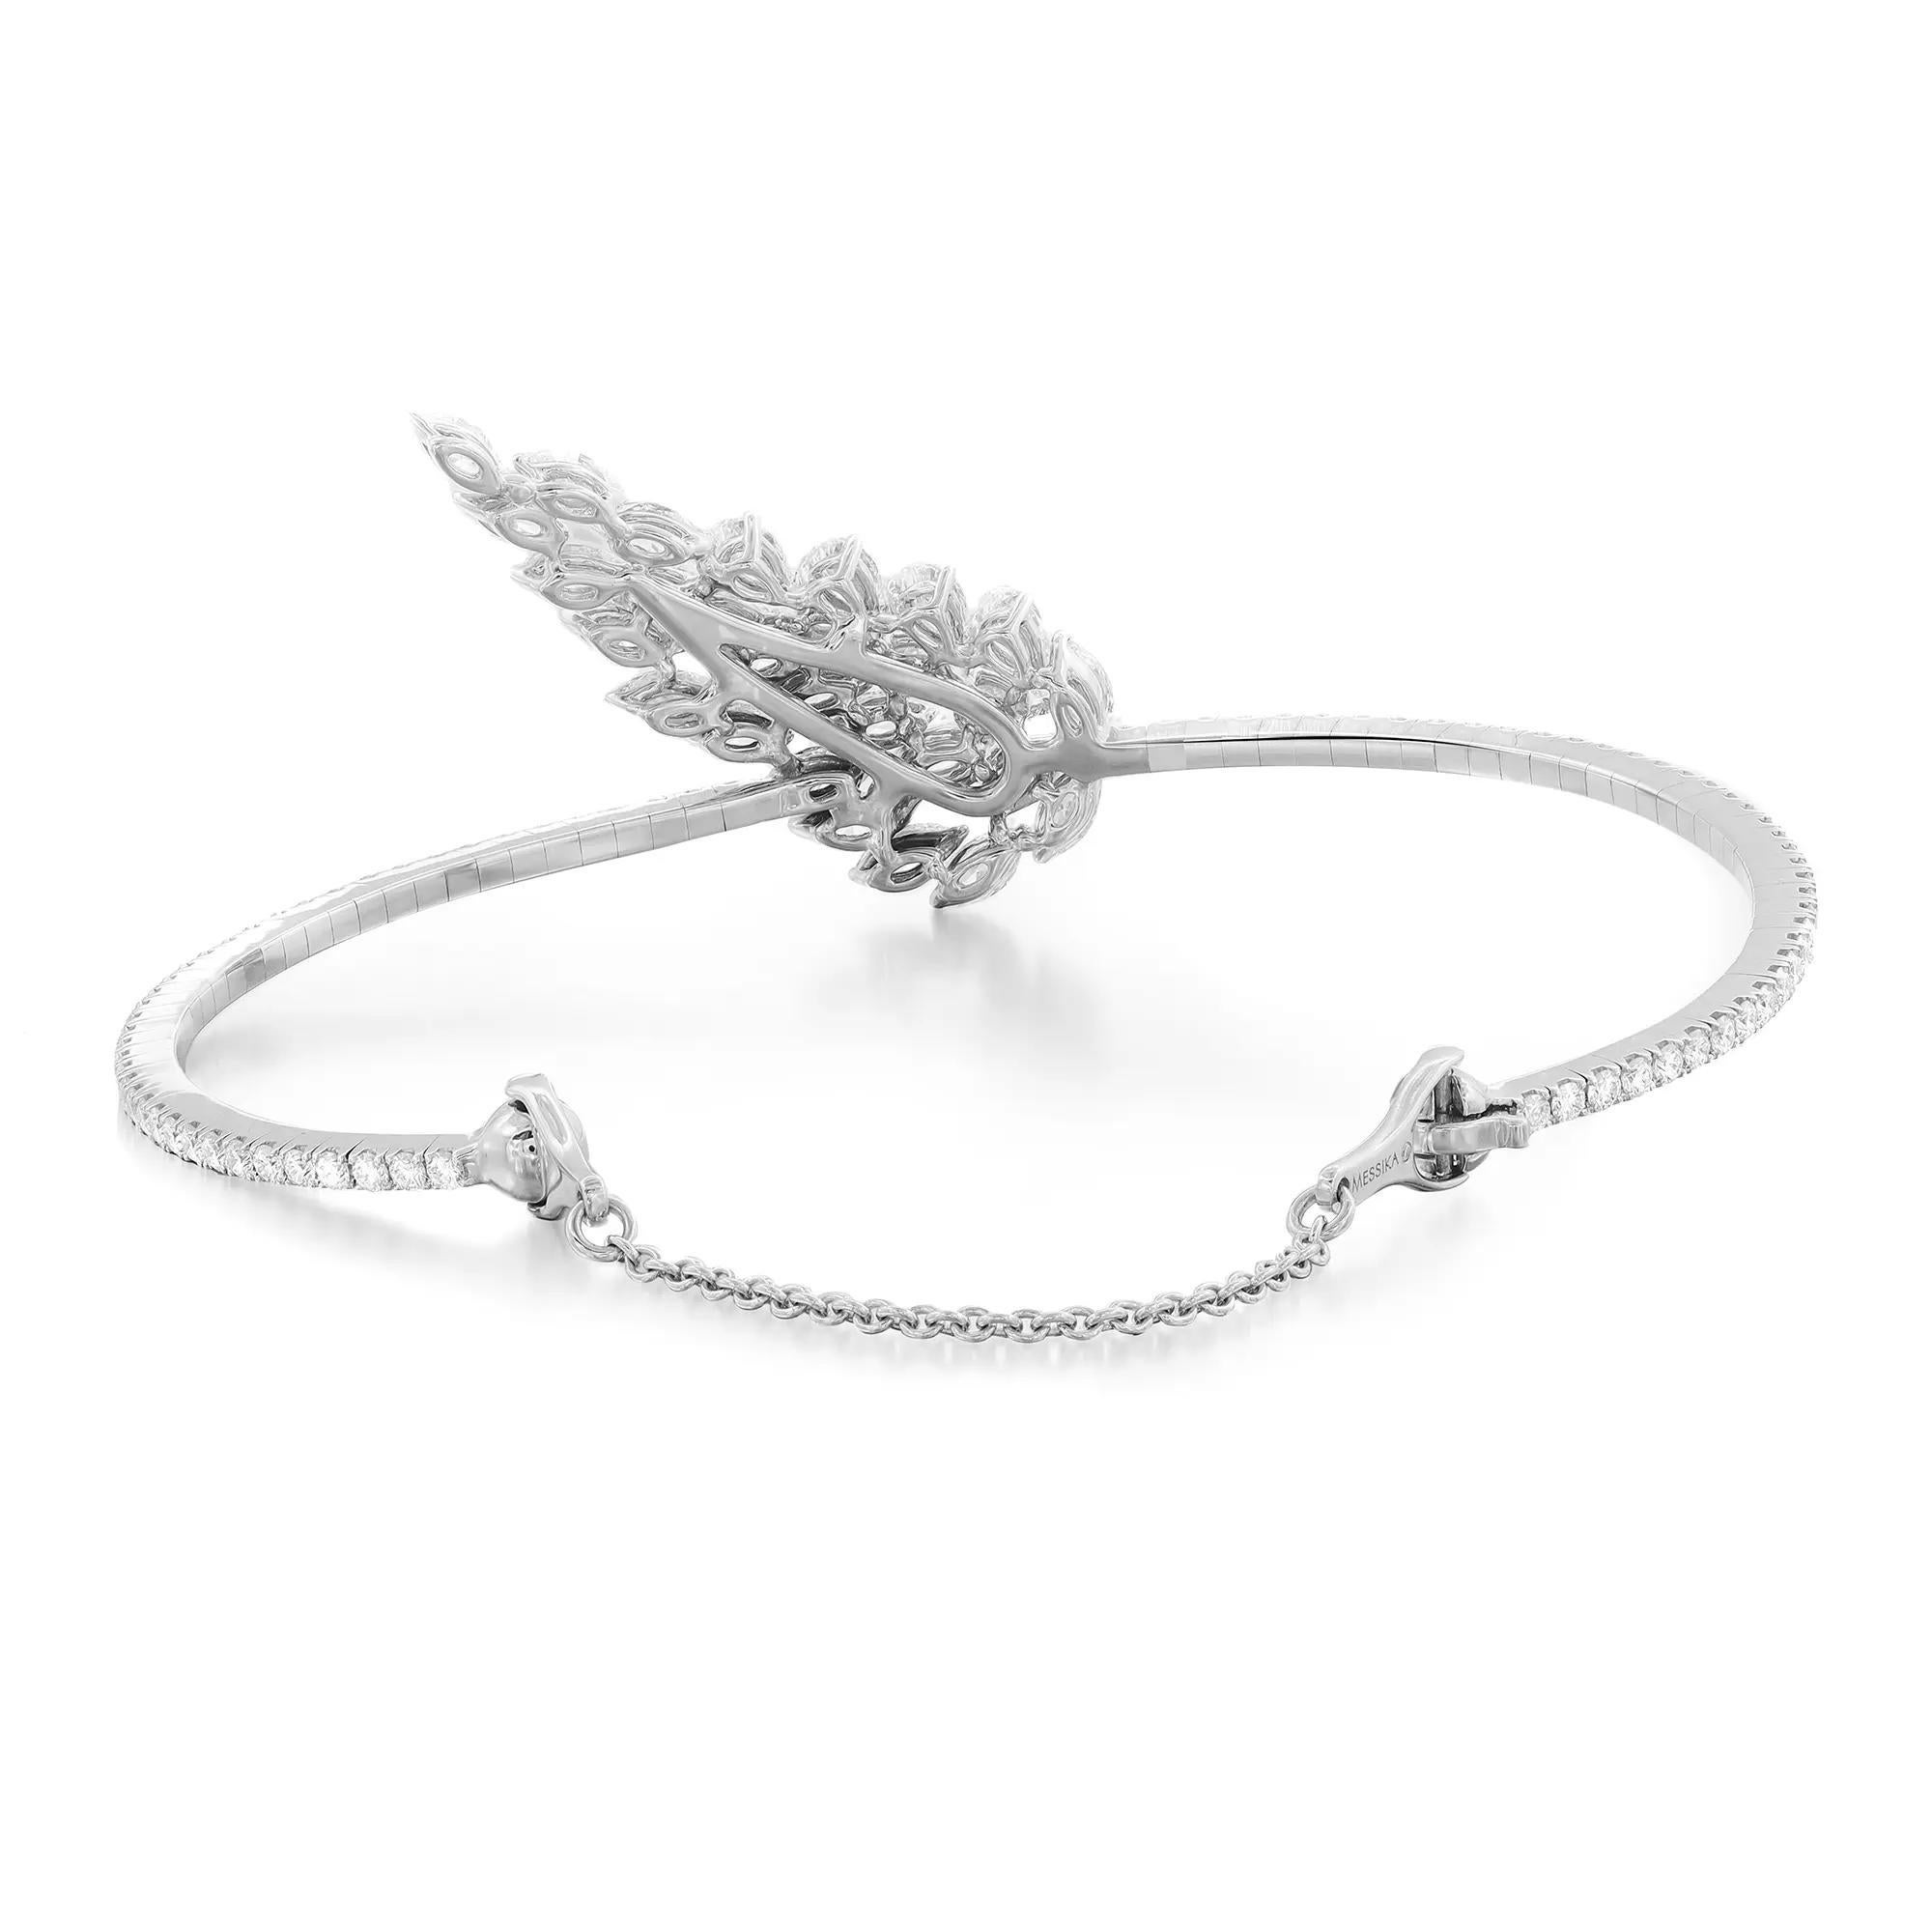 This stunning and exemplary Messika Angel Skinny bangle bracelet is crafted in highly polished 18K white gold. Starring sparkling prong set pear and marquise cut diamonds in a leaf pattern accented with round brilliant cut diamonds around the